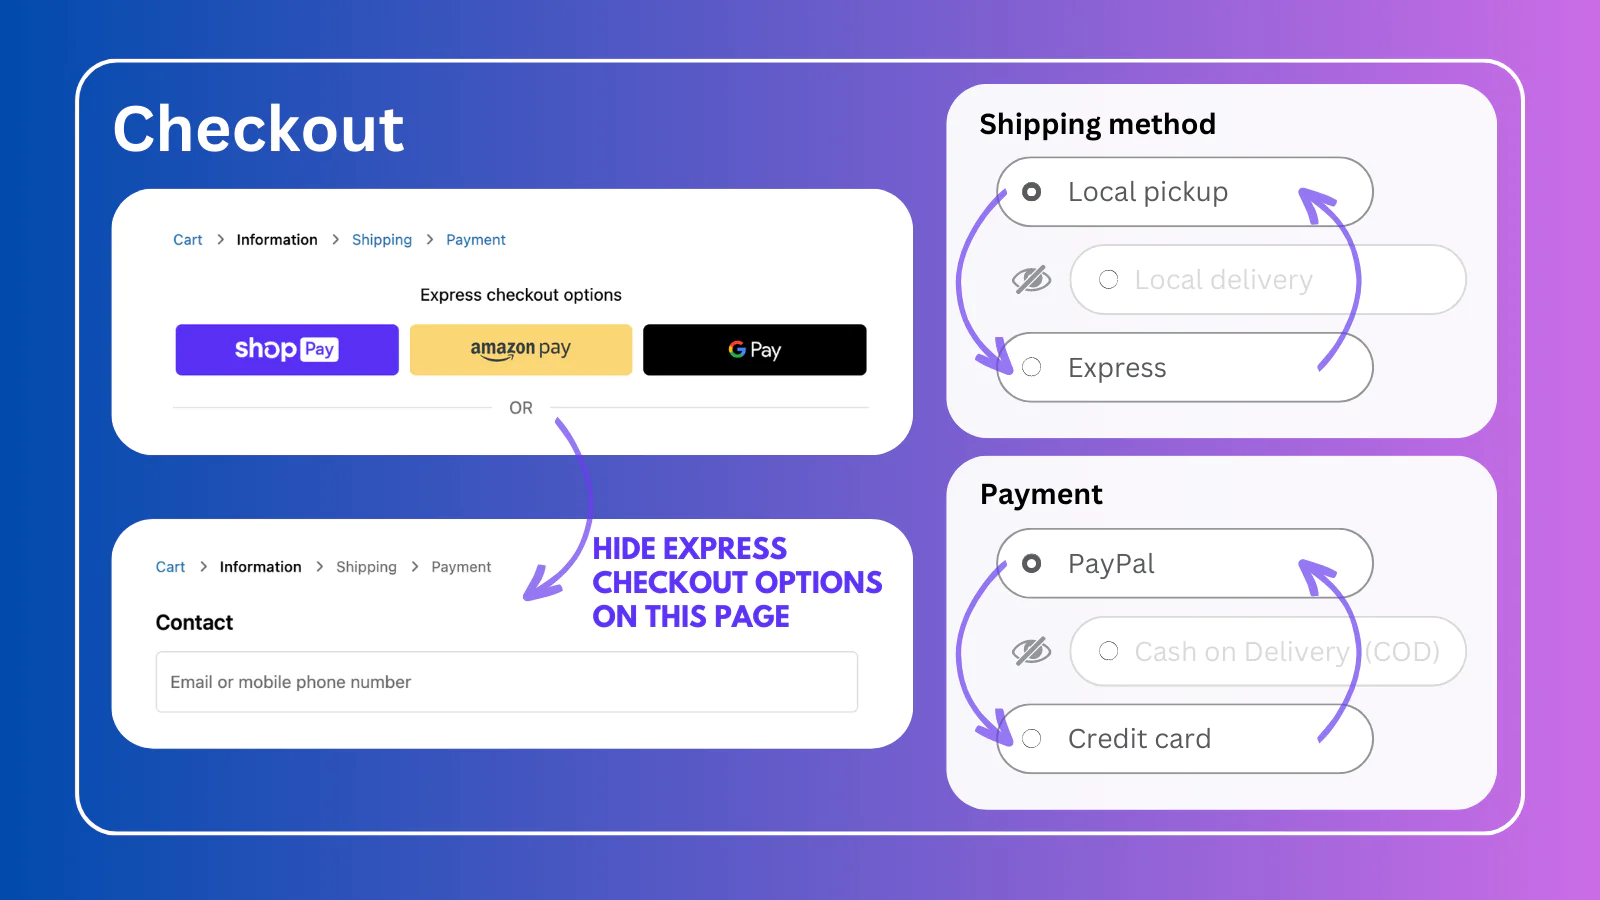 besure-checkout-rules-app-shipping-method